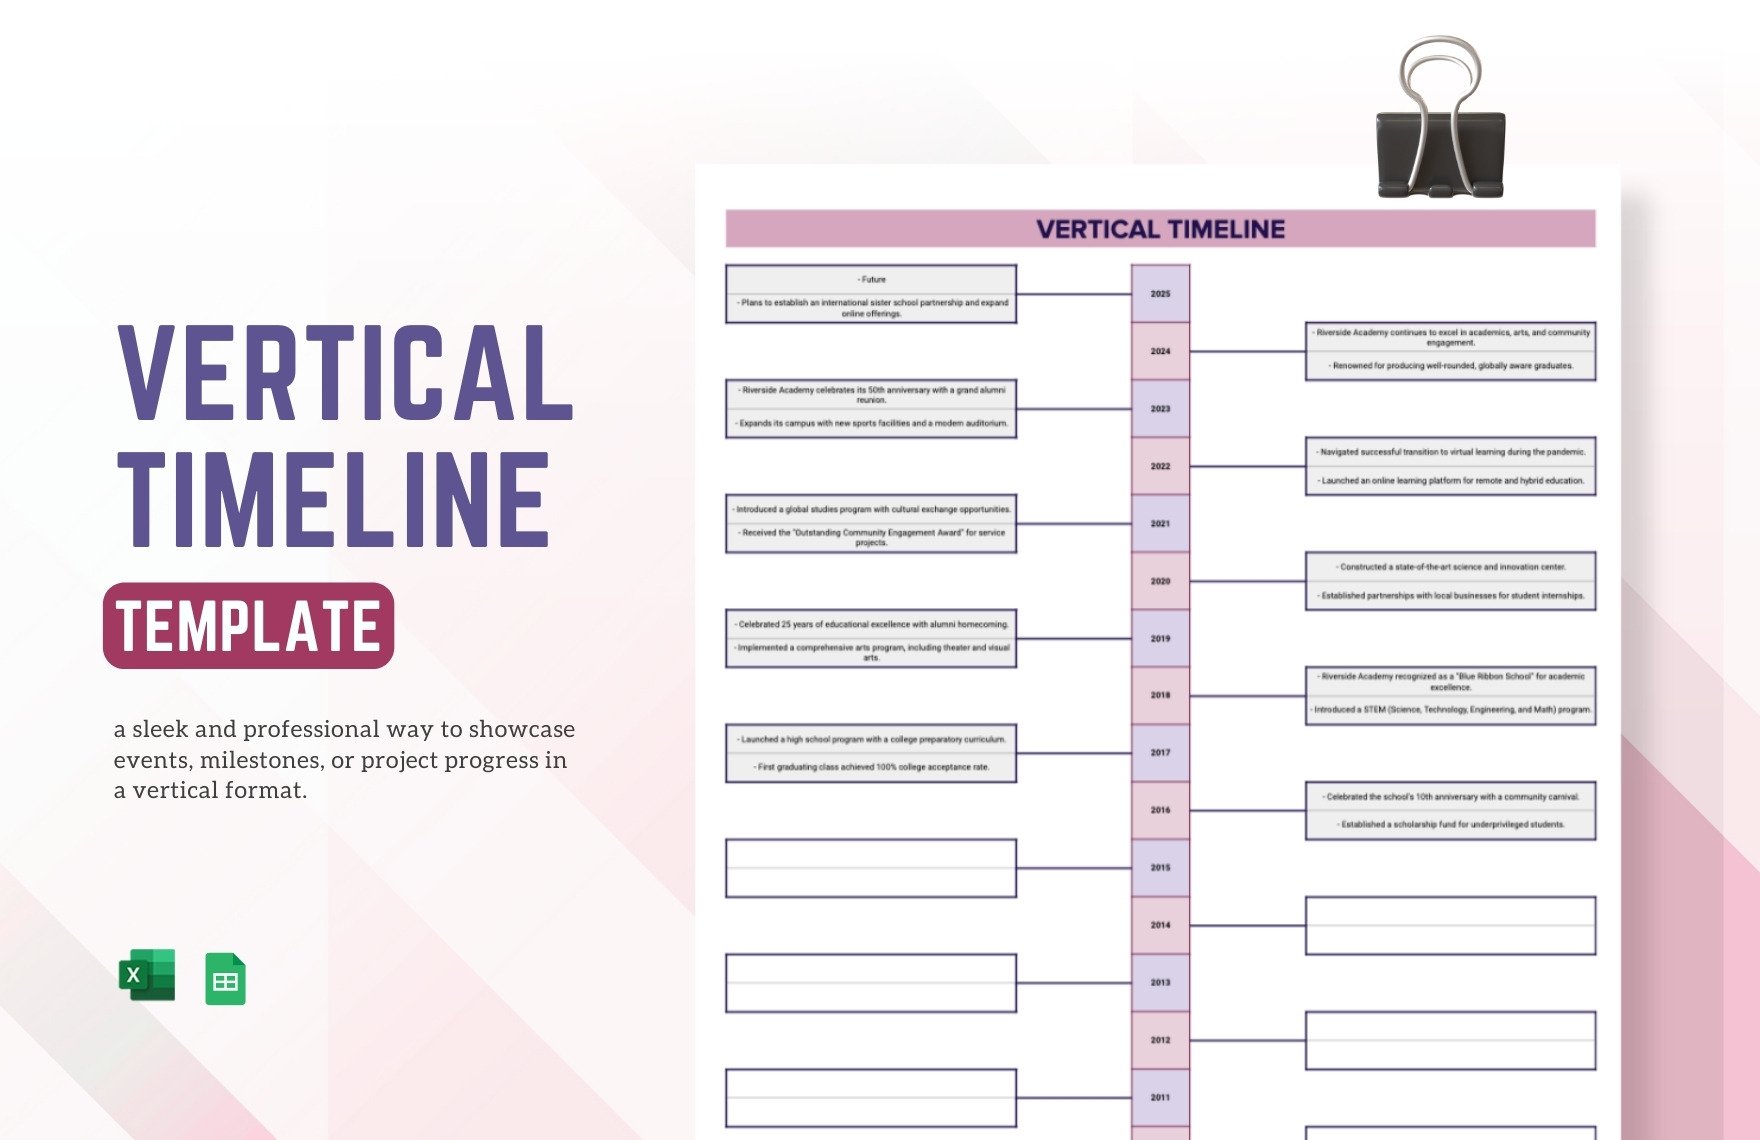 Free Vertical Timeline Template